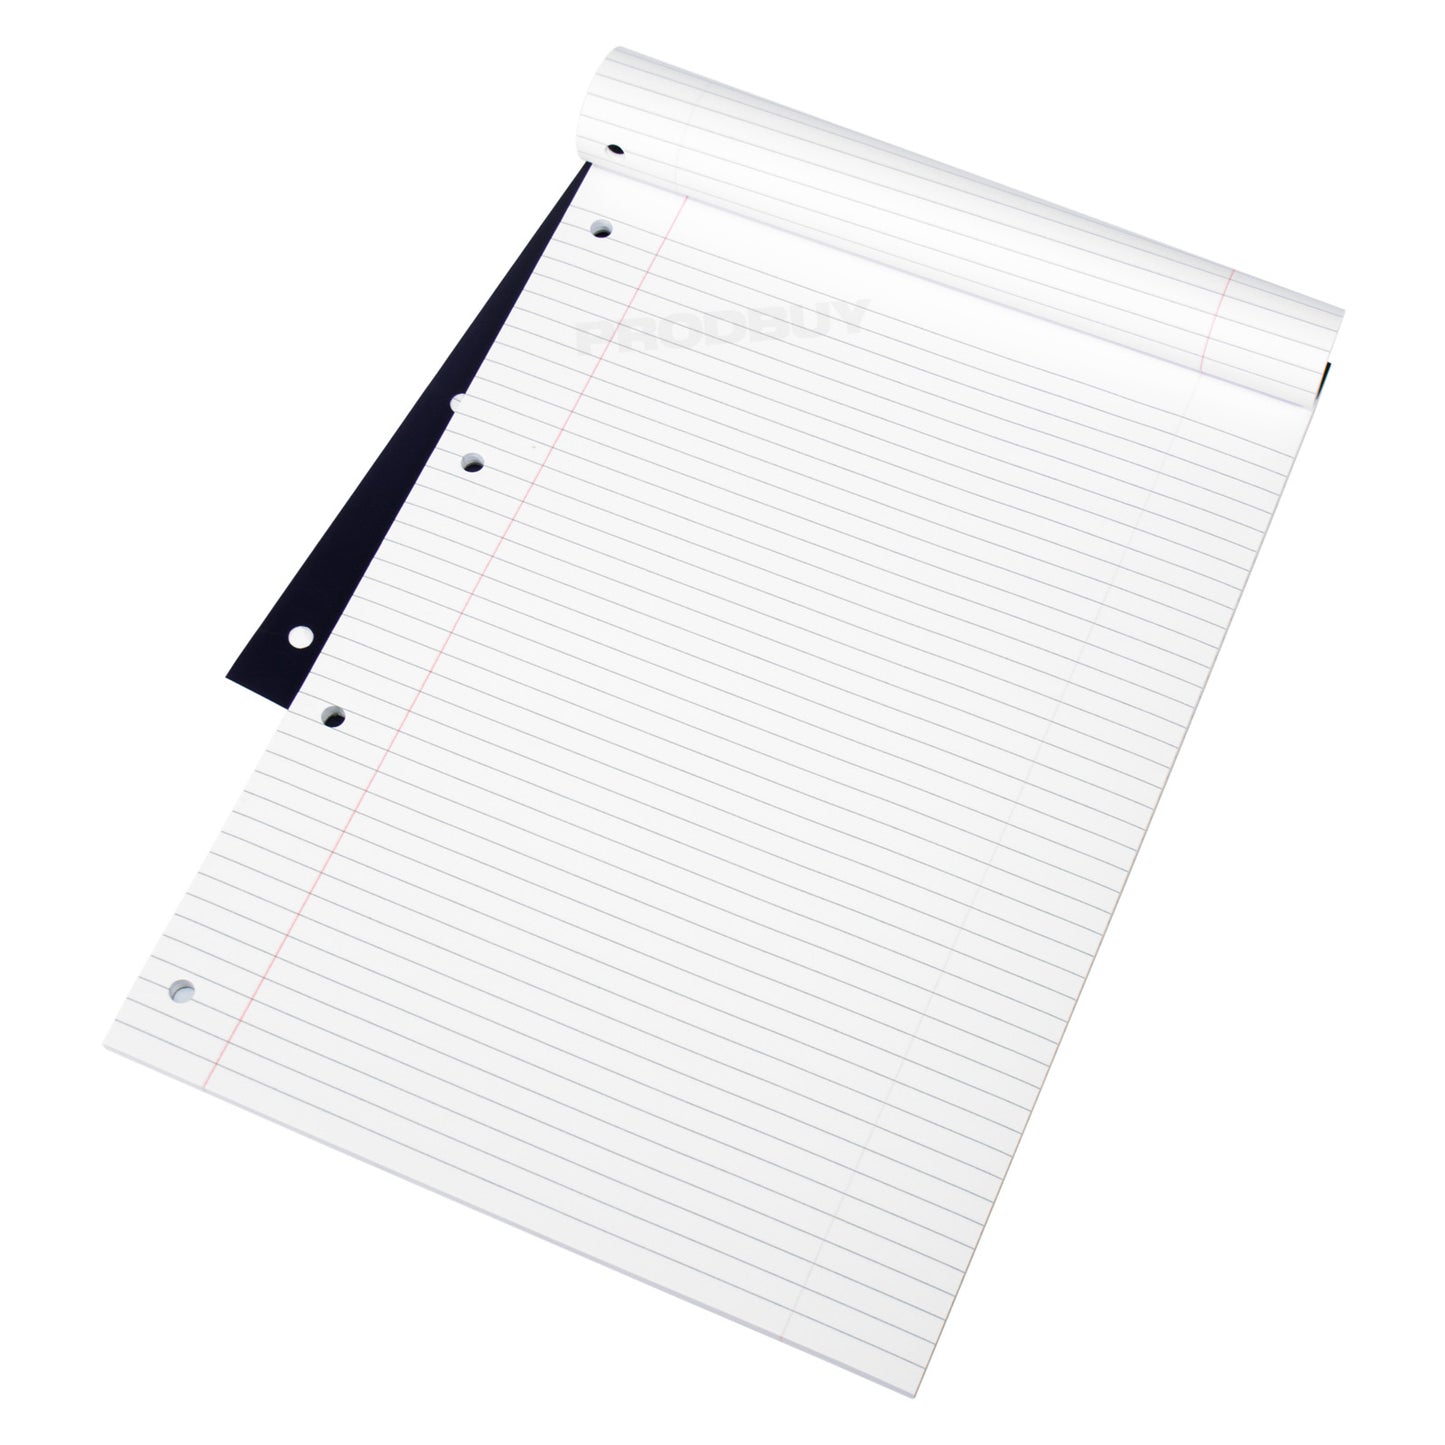 Pack of 5 A4 Top Refill Memo Pads 80 Sheet Lined Notepads